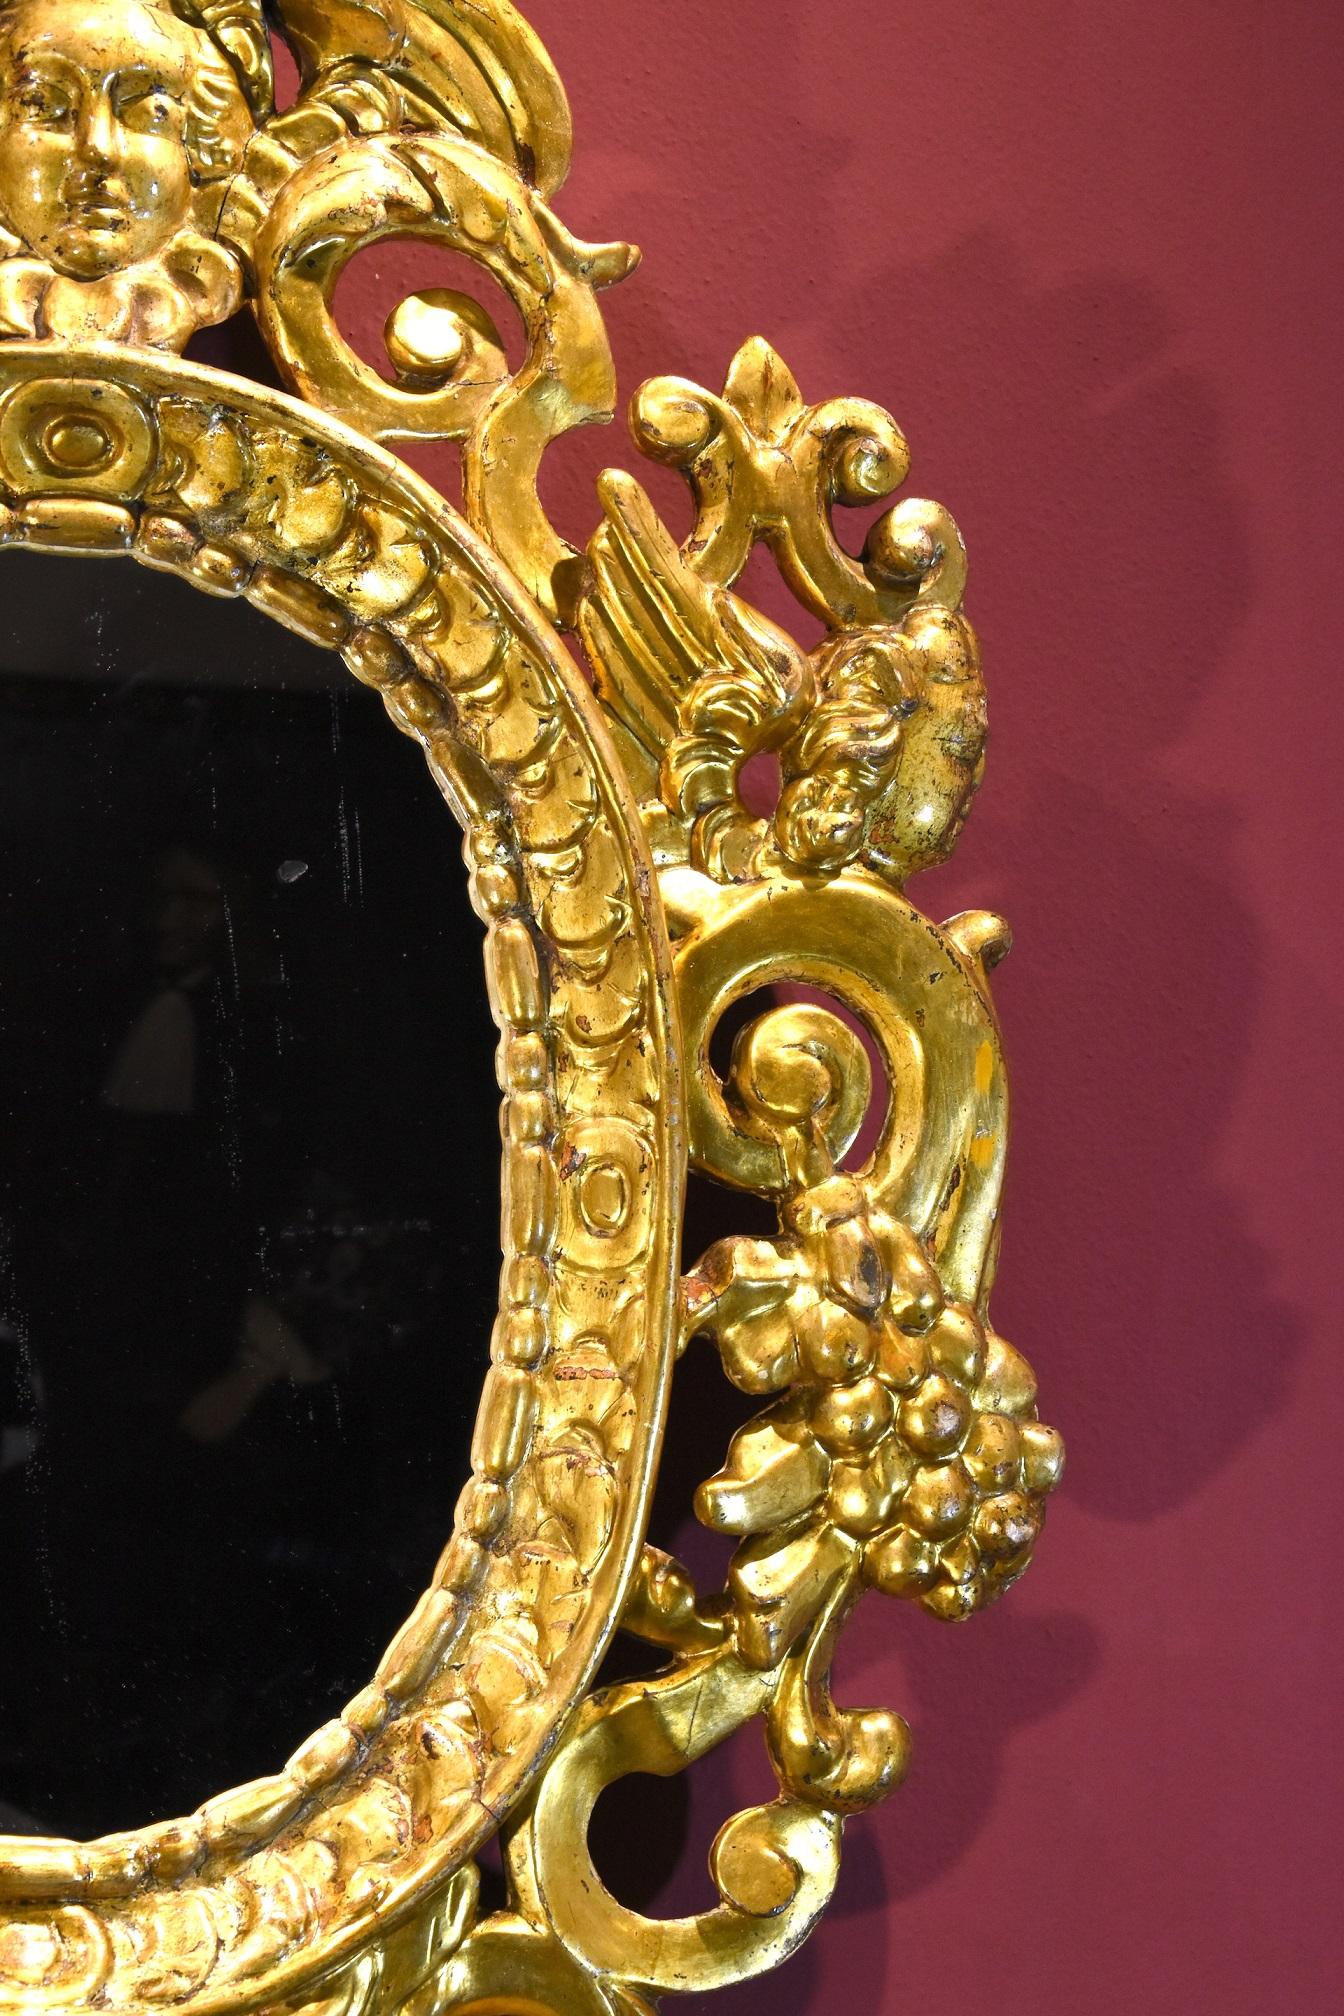 Pair Carved Gilded Mirrors Gold Wood Venice 18th Century Italy Quality Baroque For Sale 2